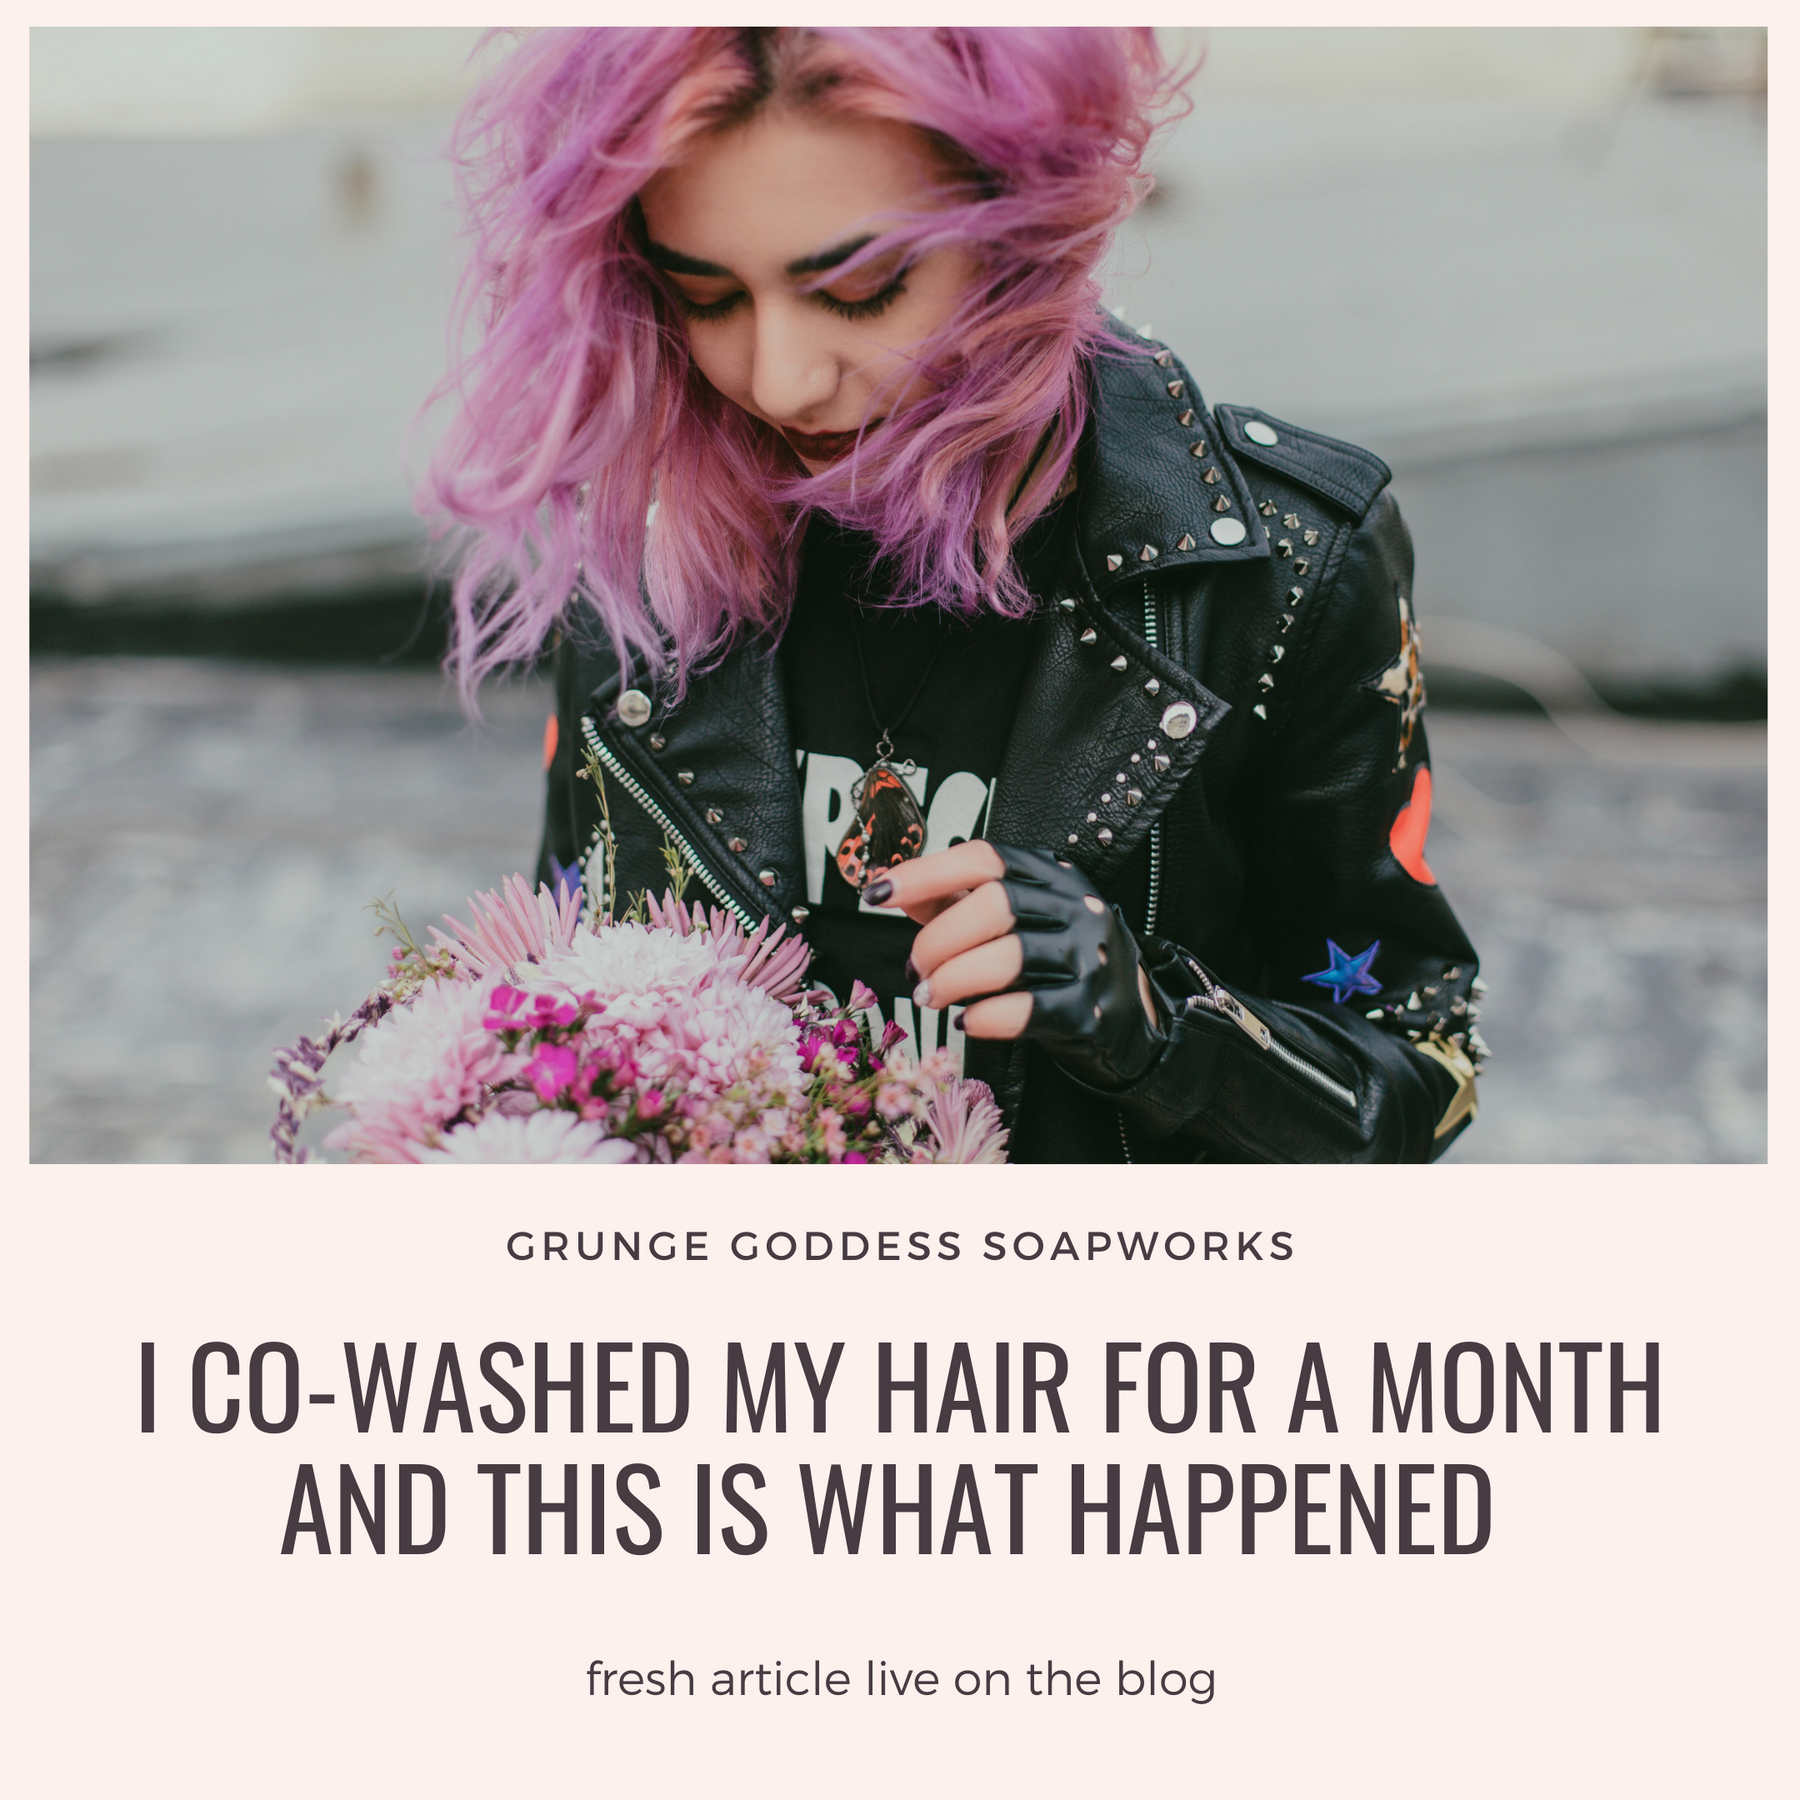 I “co-washed” my hair for a month and here’s what happened